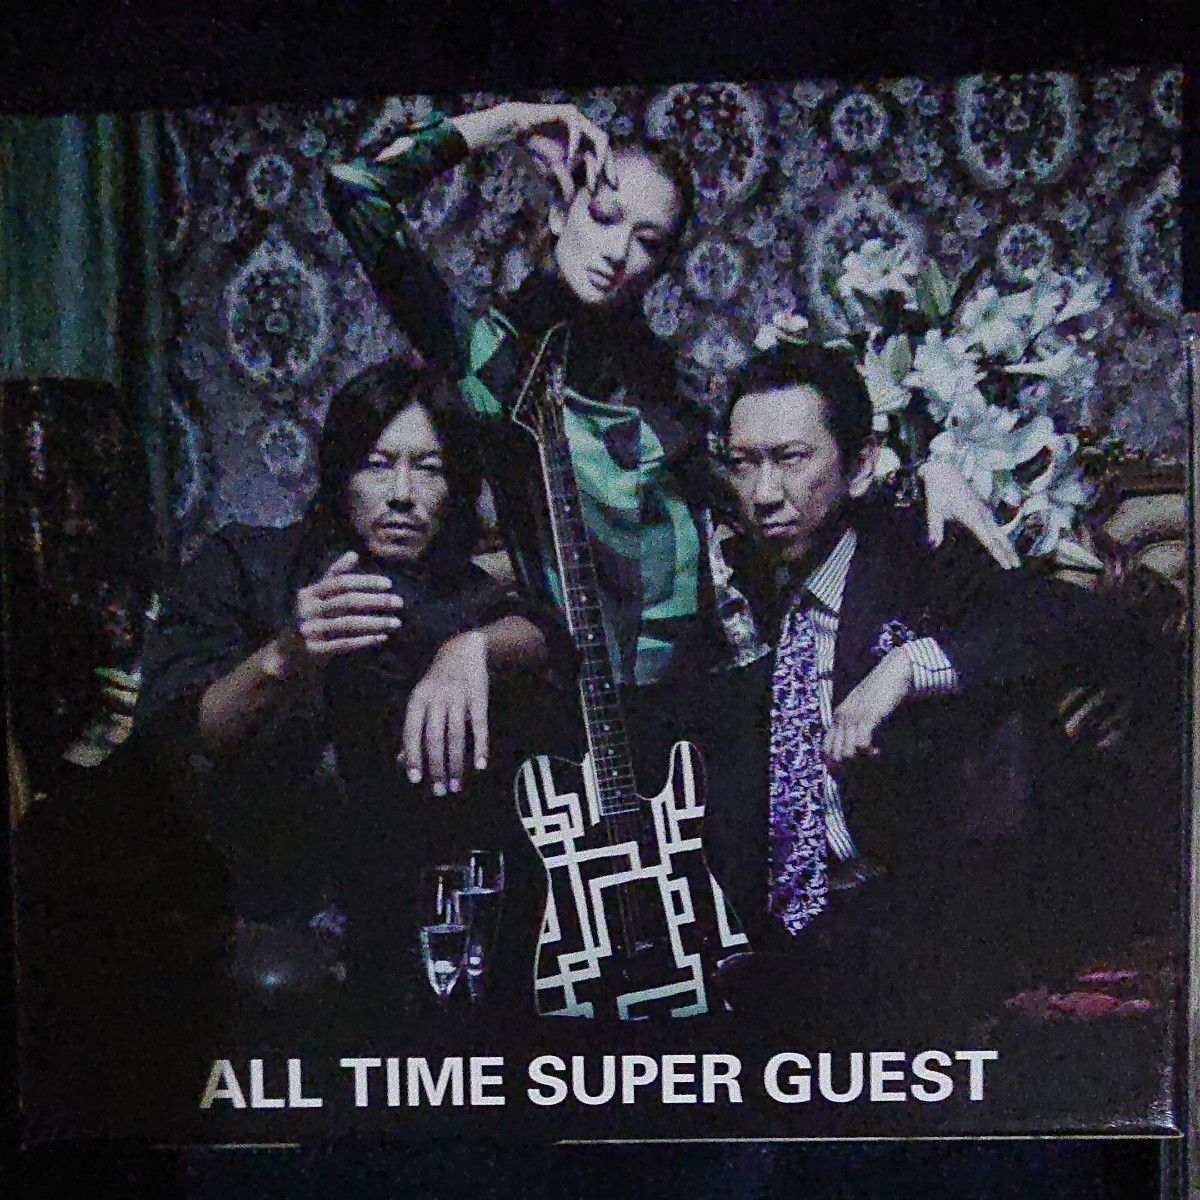 ALL TIME SUPER GUEST (初回限定盤) (DVD付) 布袋寅泰